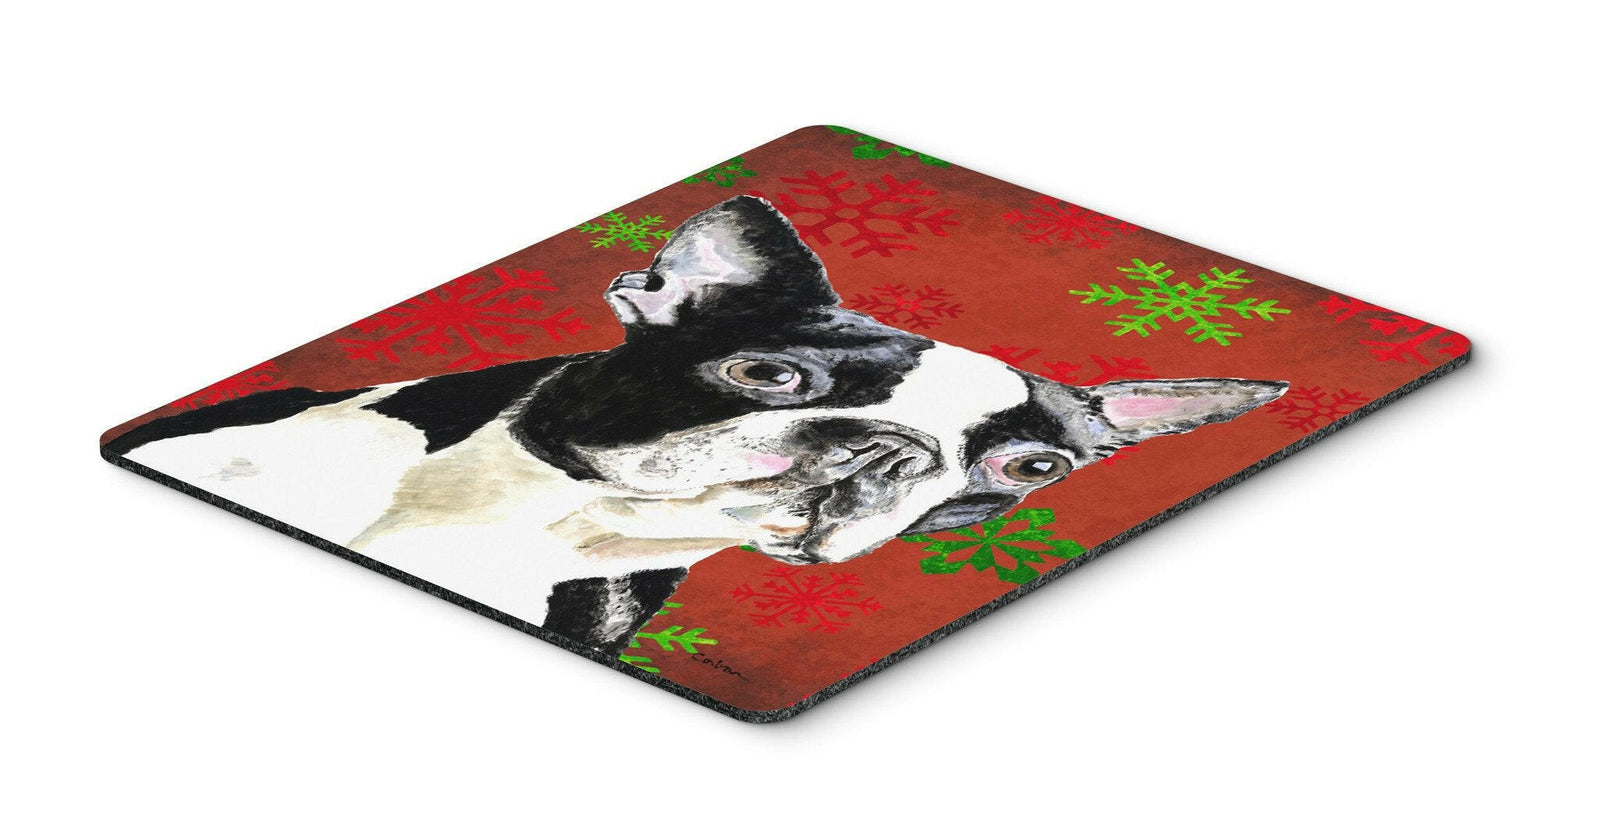 Boston Terrier Red and Green Snowflakes Christmas Mouse Pad, Hot Pad or Trivet by Caroline's Treasures